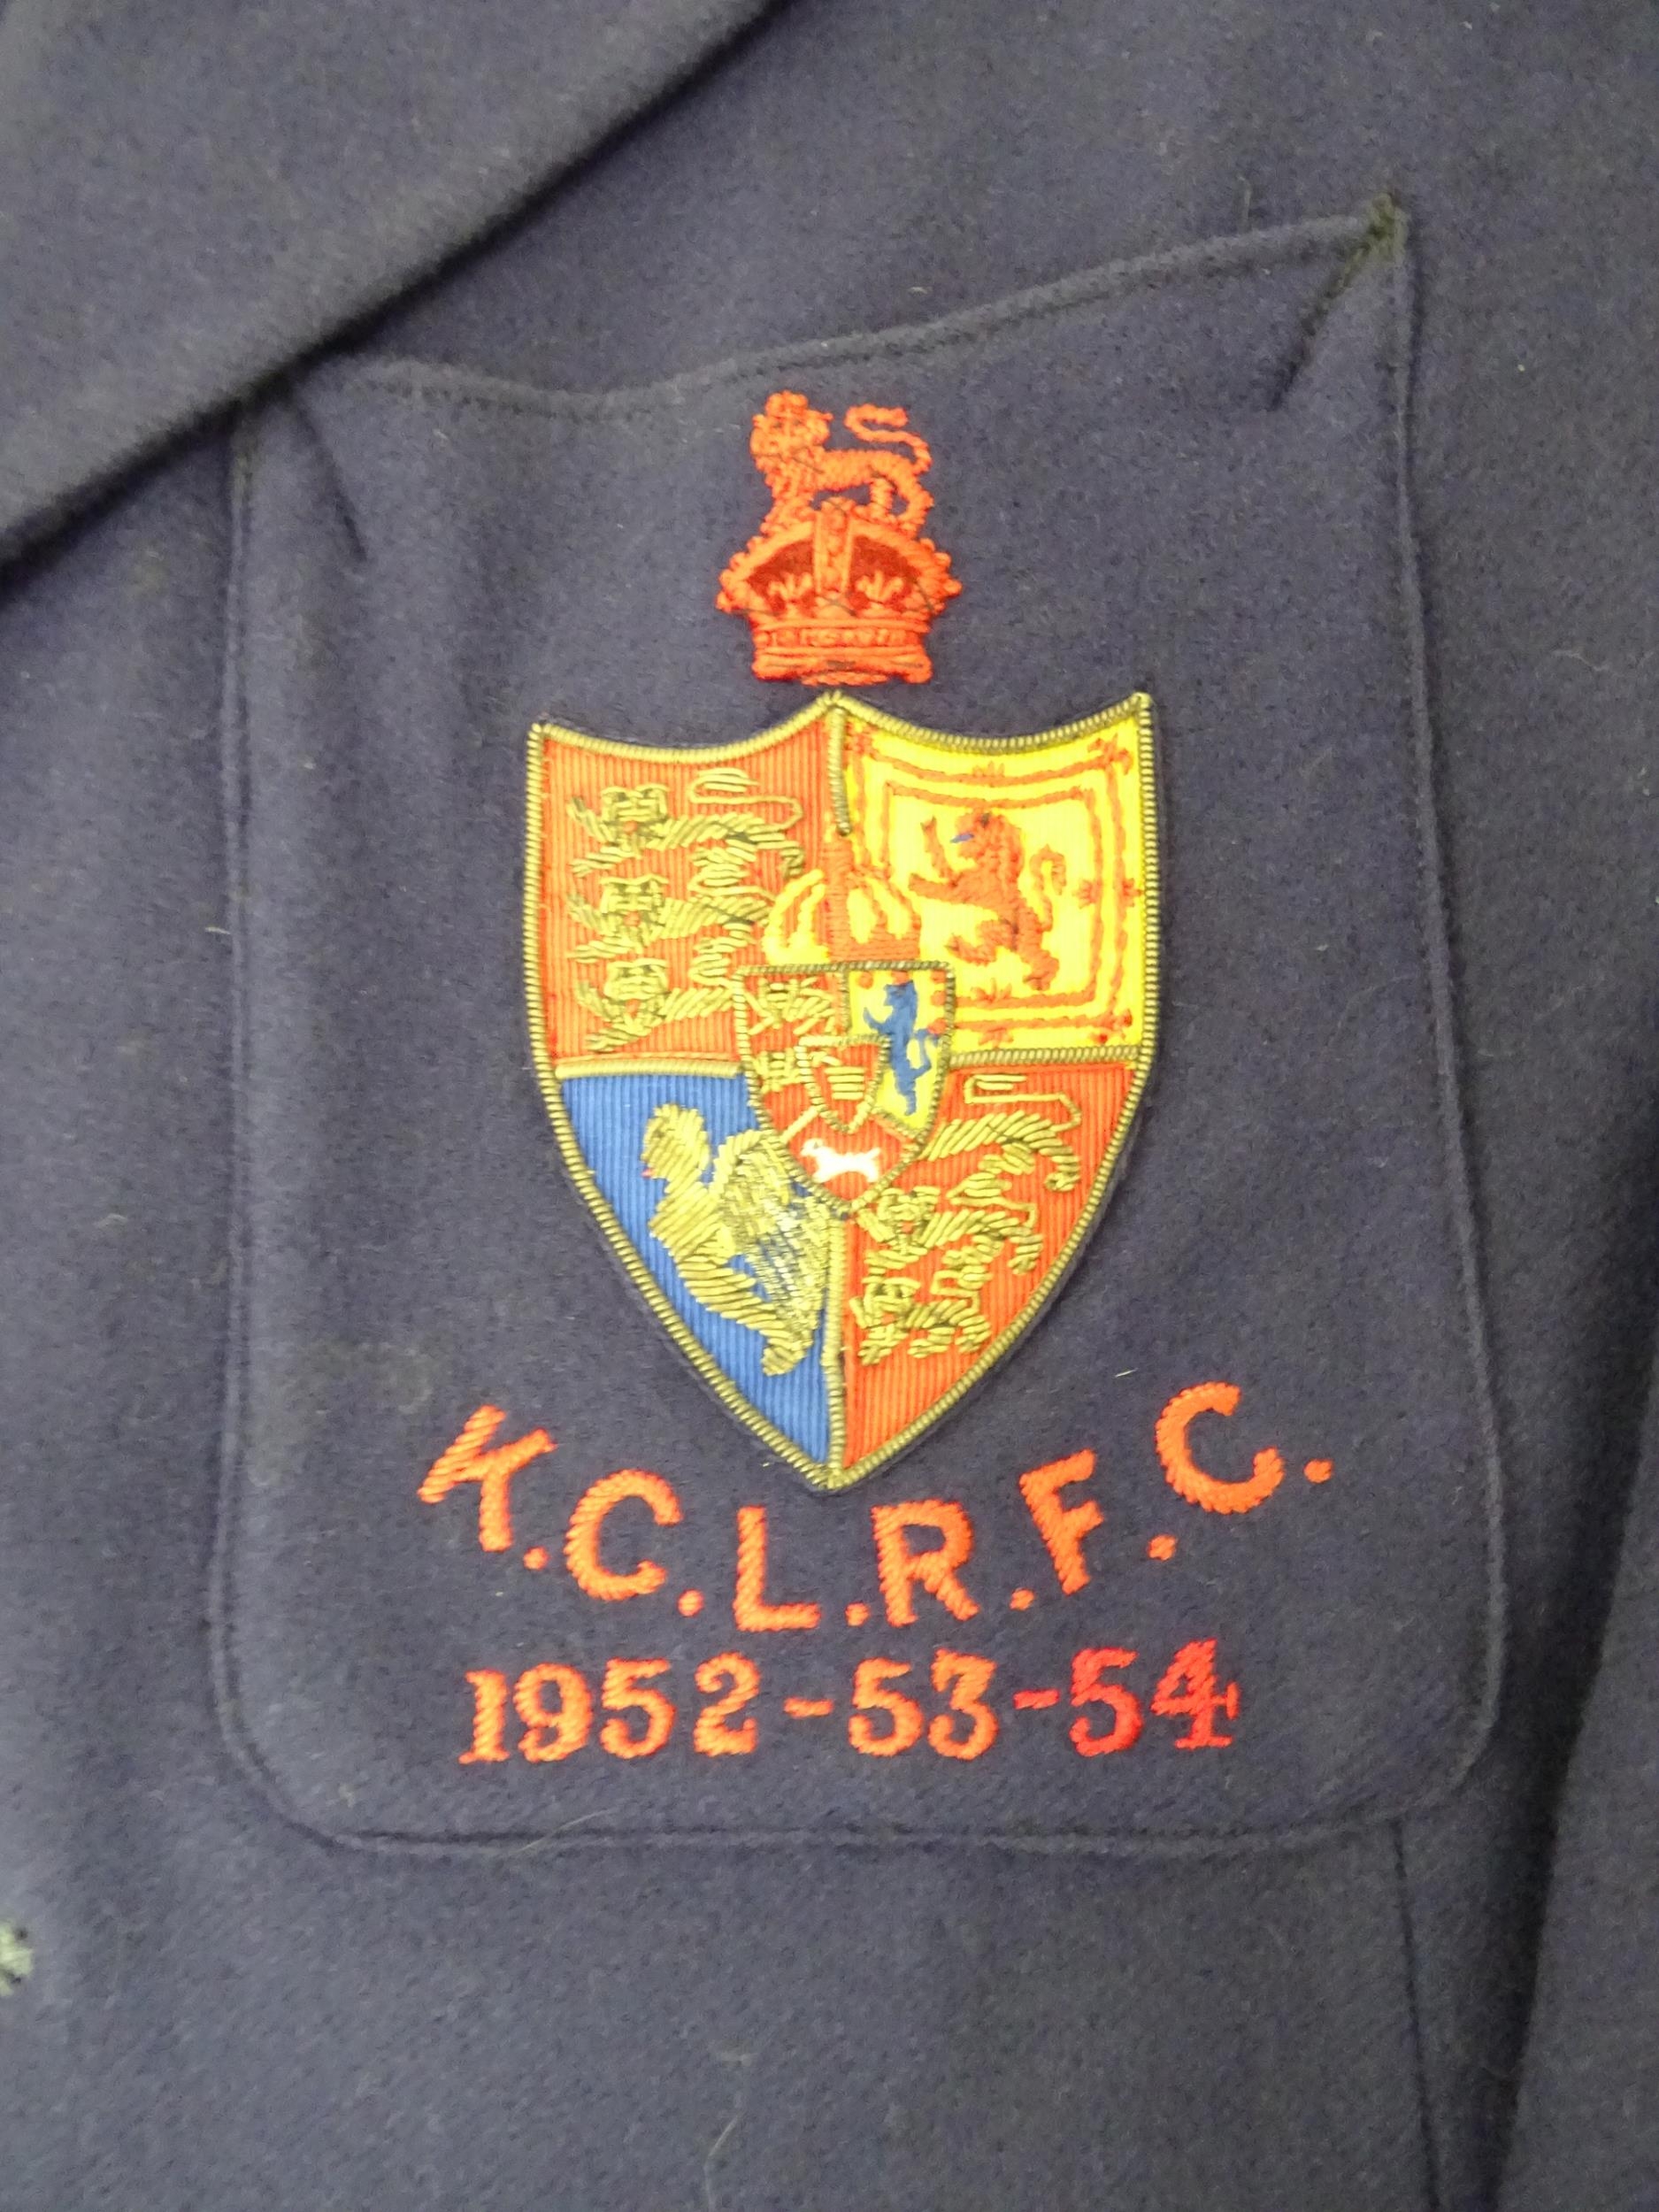 A vintage blazer by Jack Hobbs Ltd., London, with badge for K.C.L.R.F.C 1952, 53, 54 Please Note - - Image 3 of 7